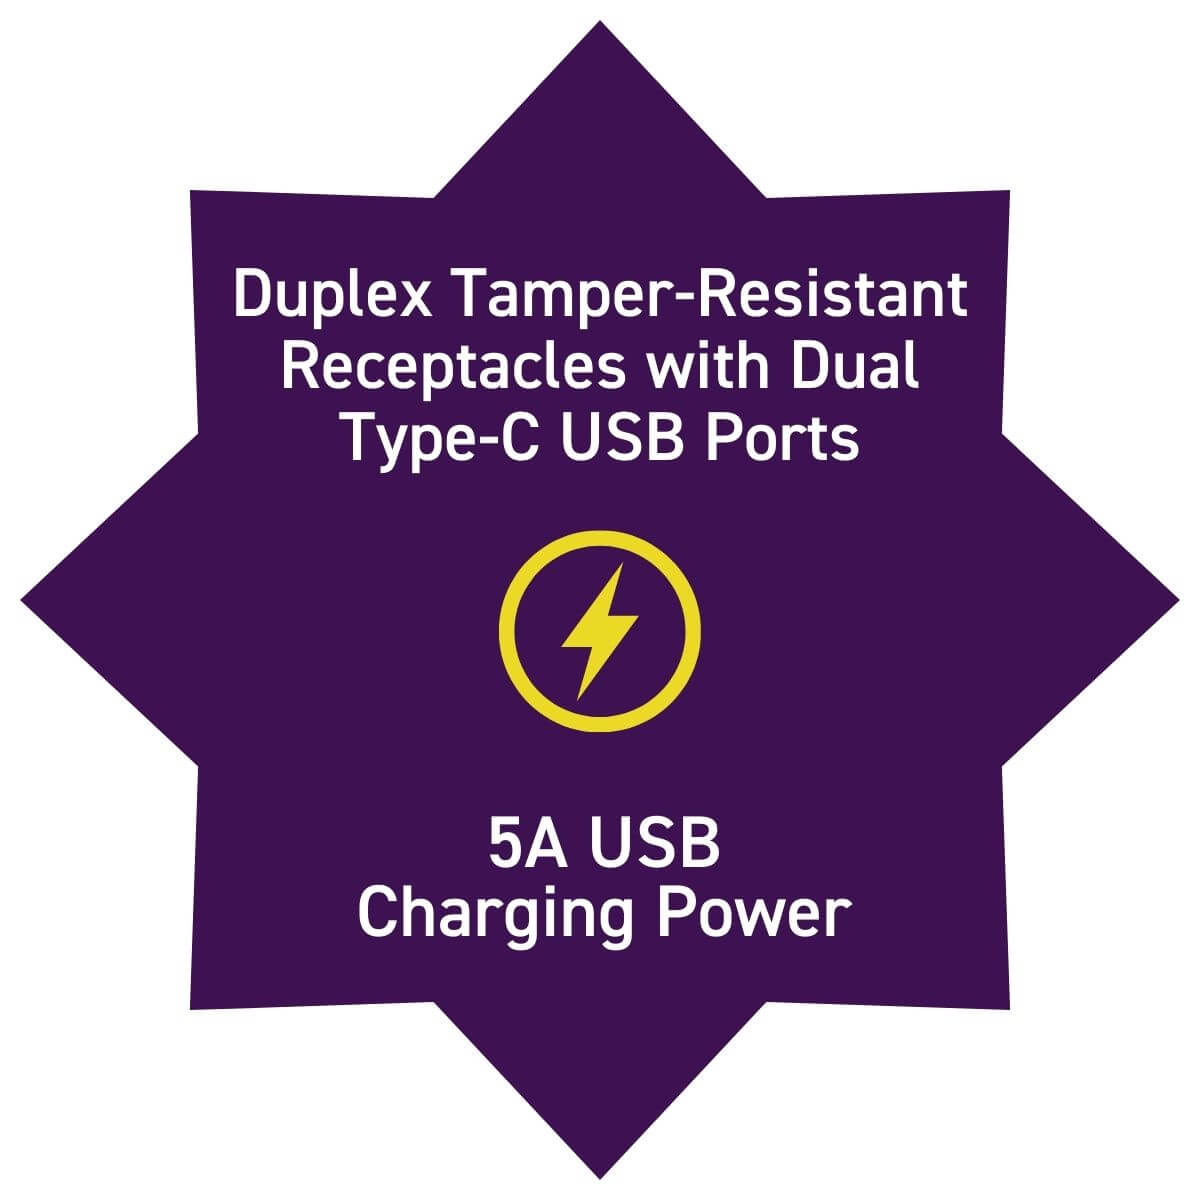 Duplex Tamper-Resistant<br />
Receptacles with USB Type-A and USB Type-C Ports.<br />
Combined Total of 5A<br />
Charging Power